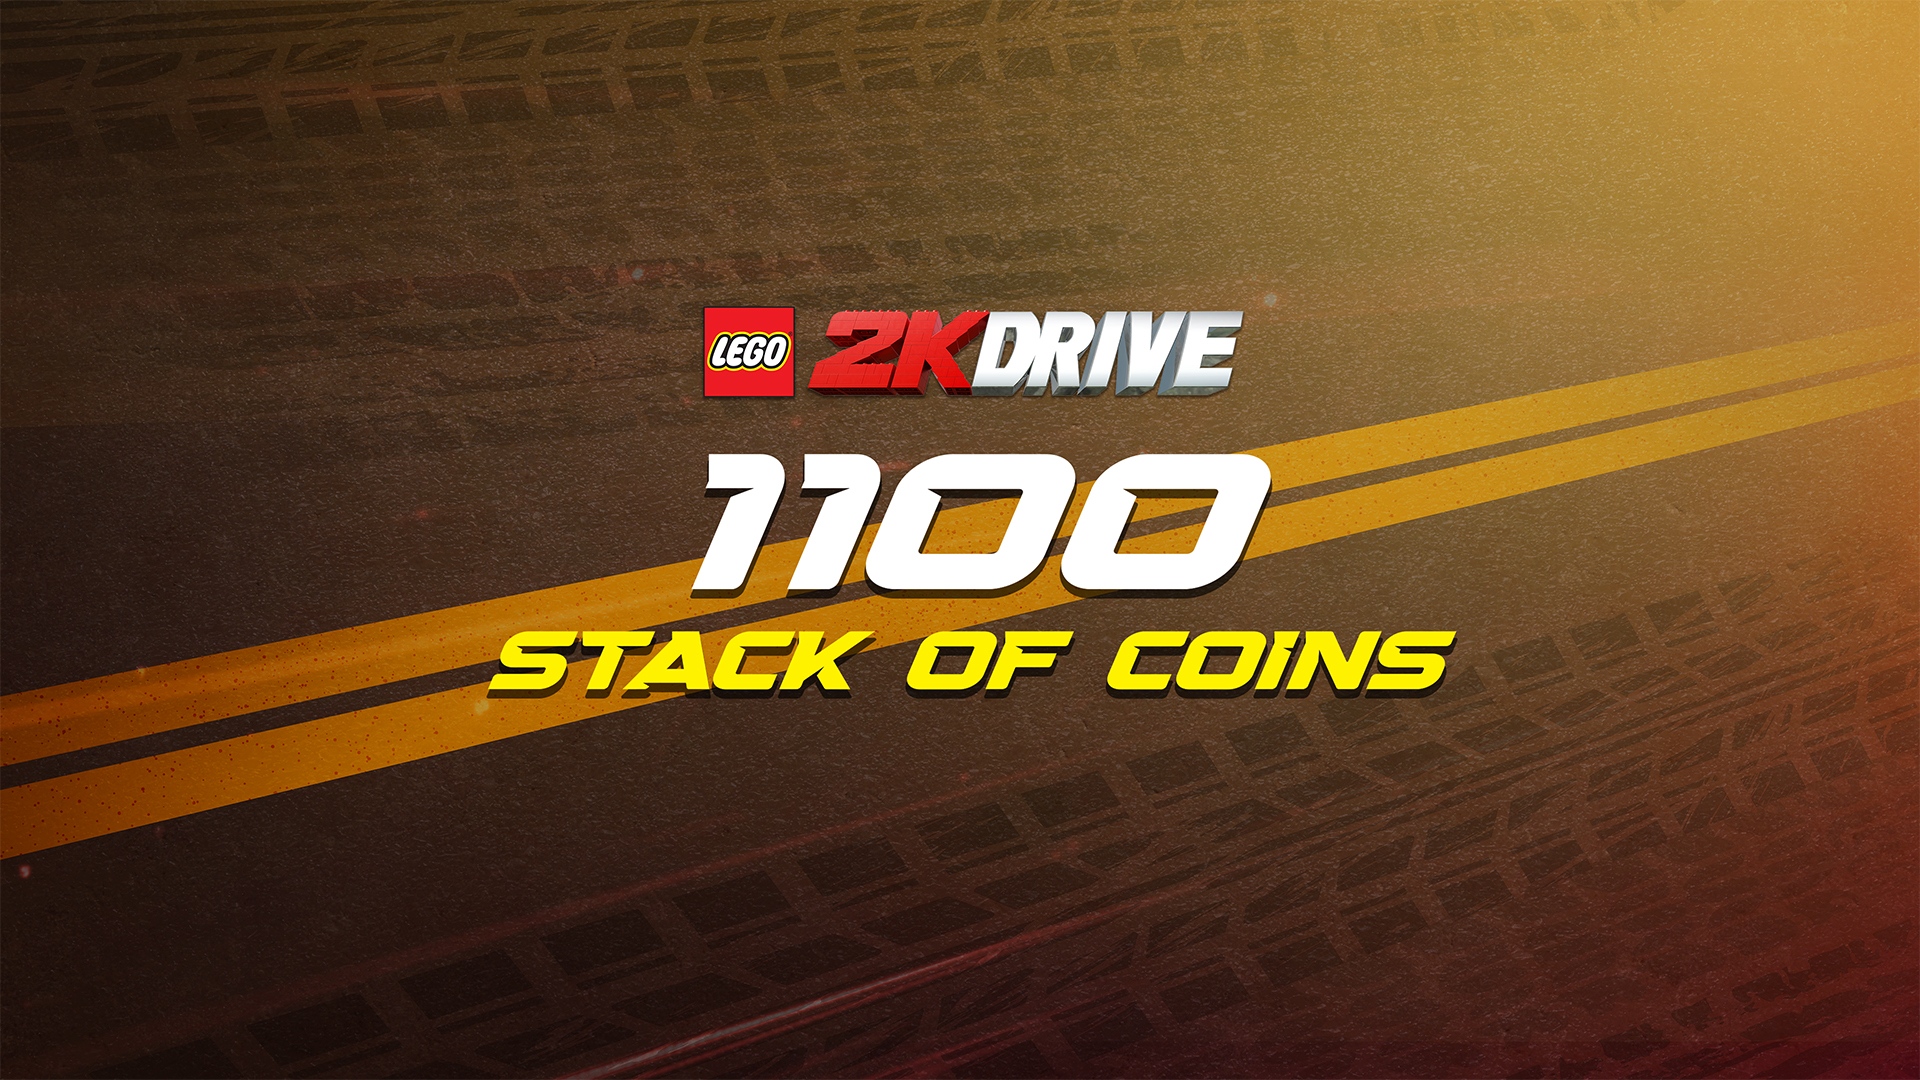 LEGO 2K Drive - Stack of Coins XBOX One / Xbox Series X|S CD Key 10.42 $